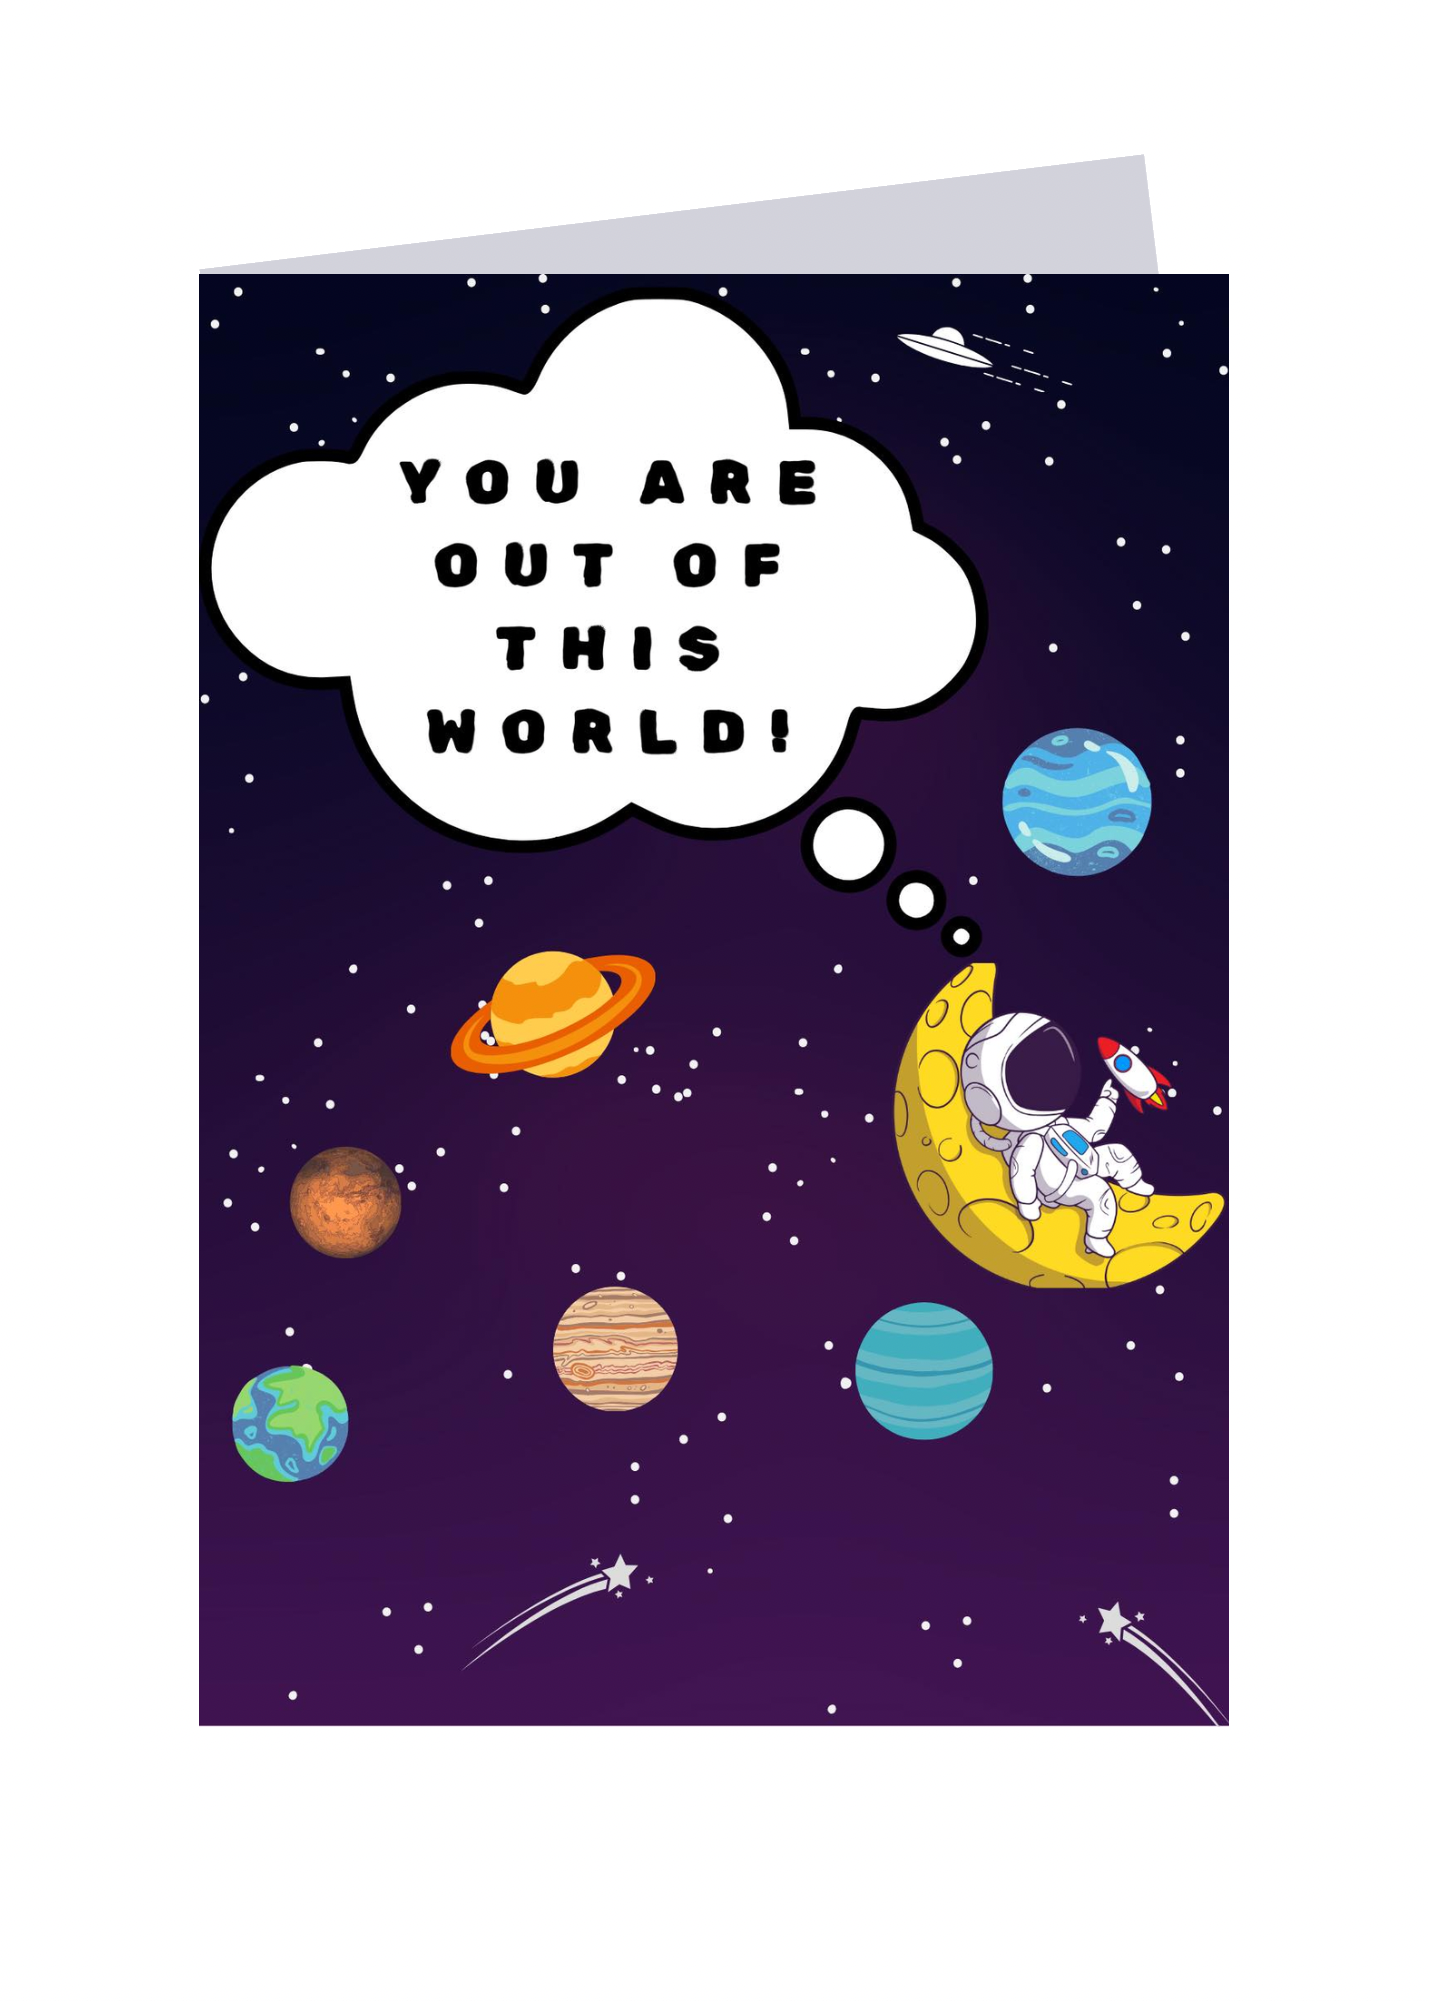 You are out of this world!